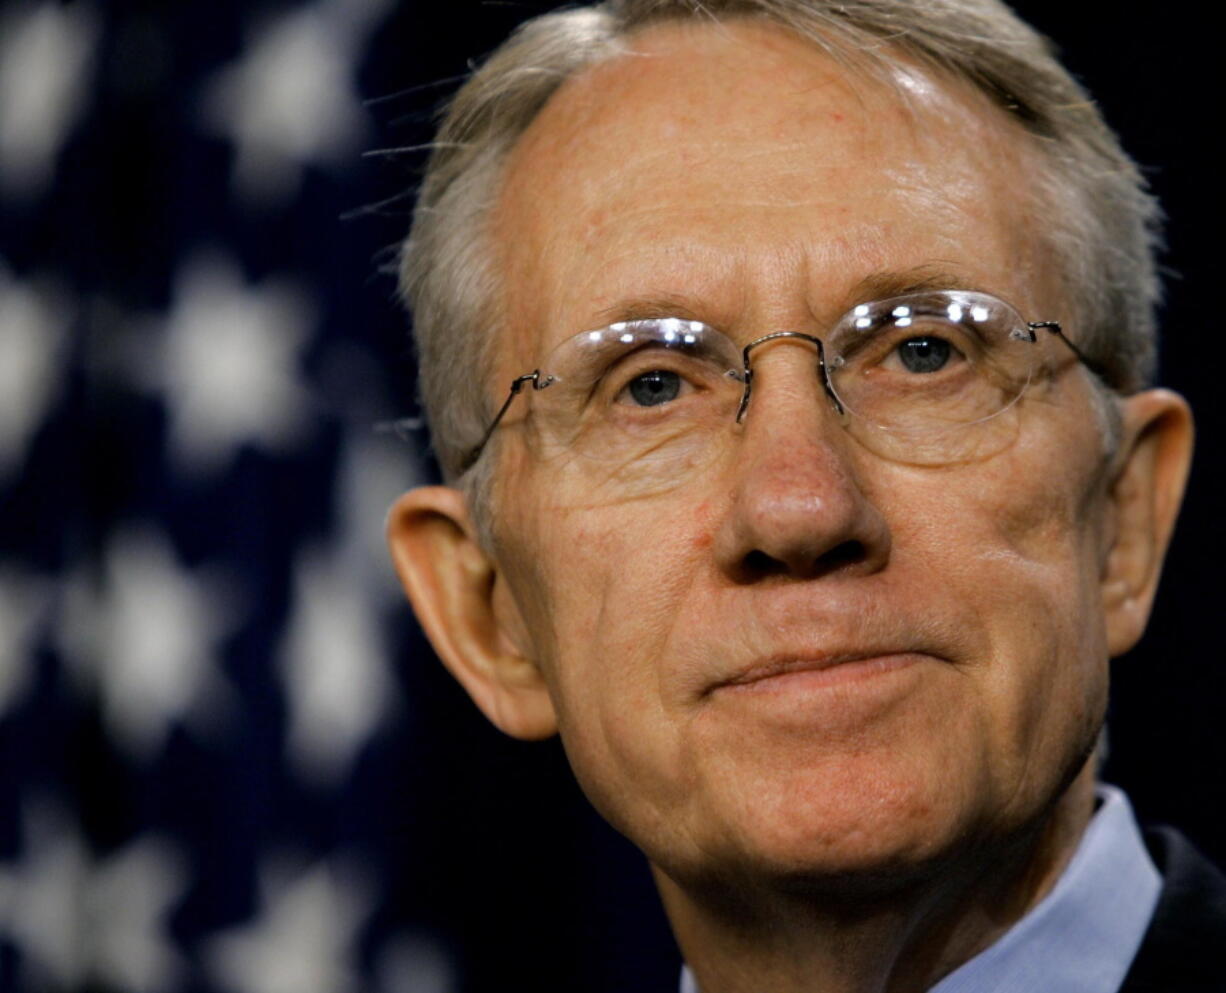 FILE -  Sen. Harry Reid, D-Nev., speaks to reporters in the Capitol after winning election by his Democratic peers as the new Senate minority leader, on Nov. 16, 2004, in Washington. Reid, the former Senate majority leader and Nevada's longest-serving member of Congress, has died. He was 82. (AP Photo/J.